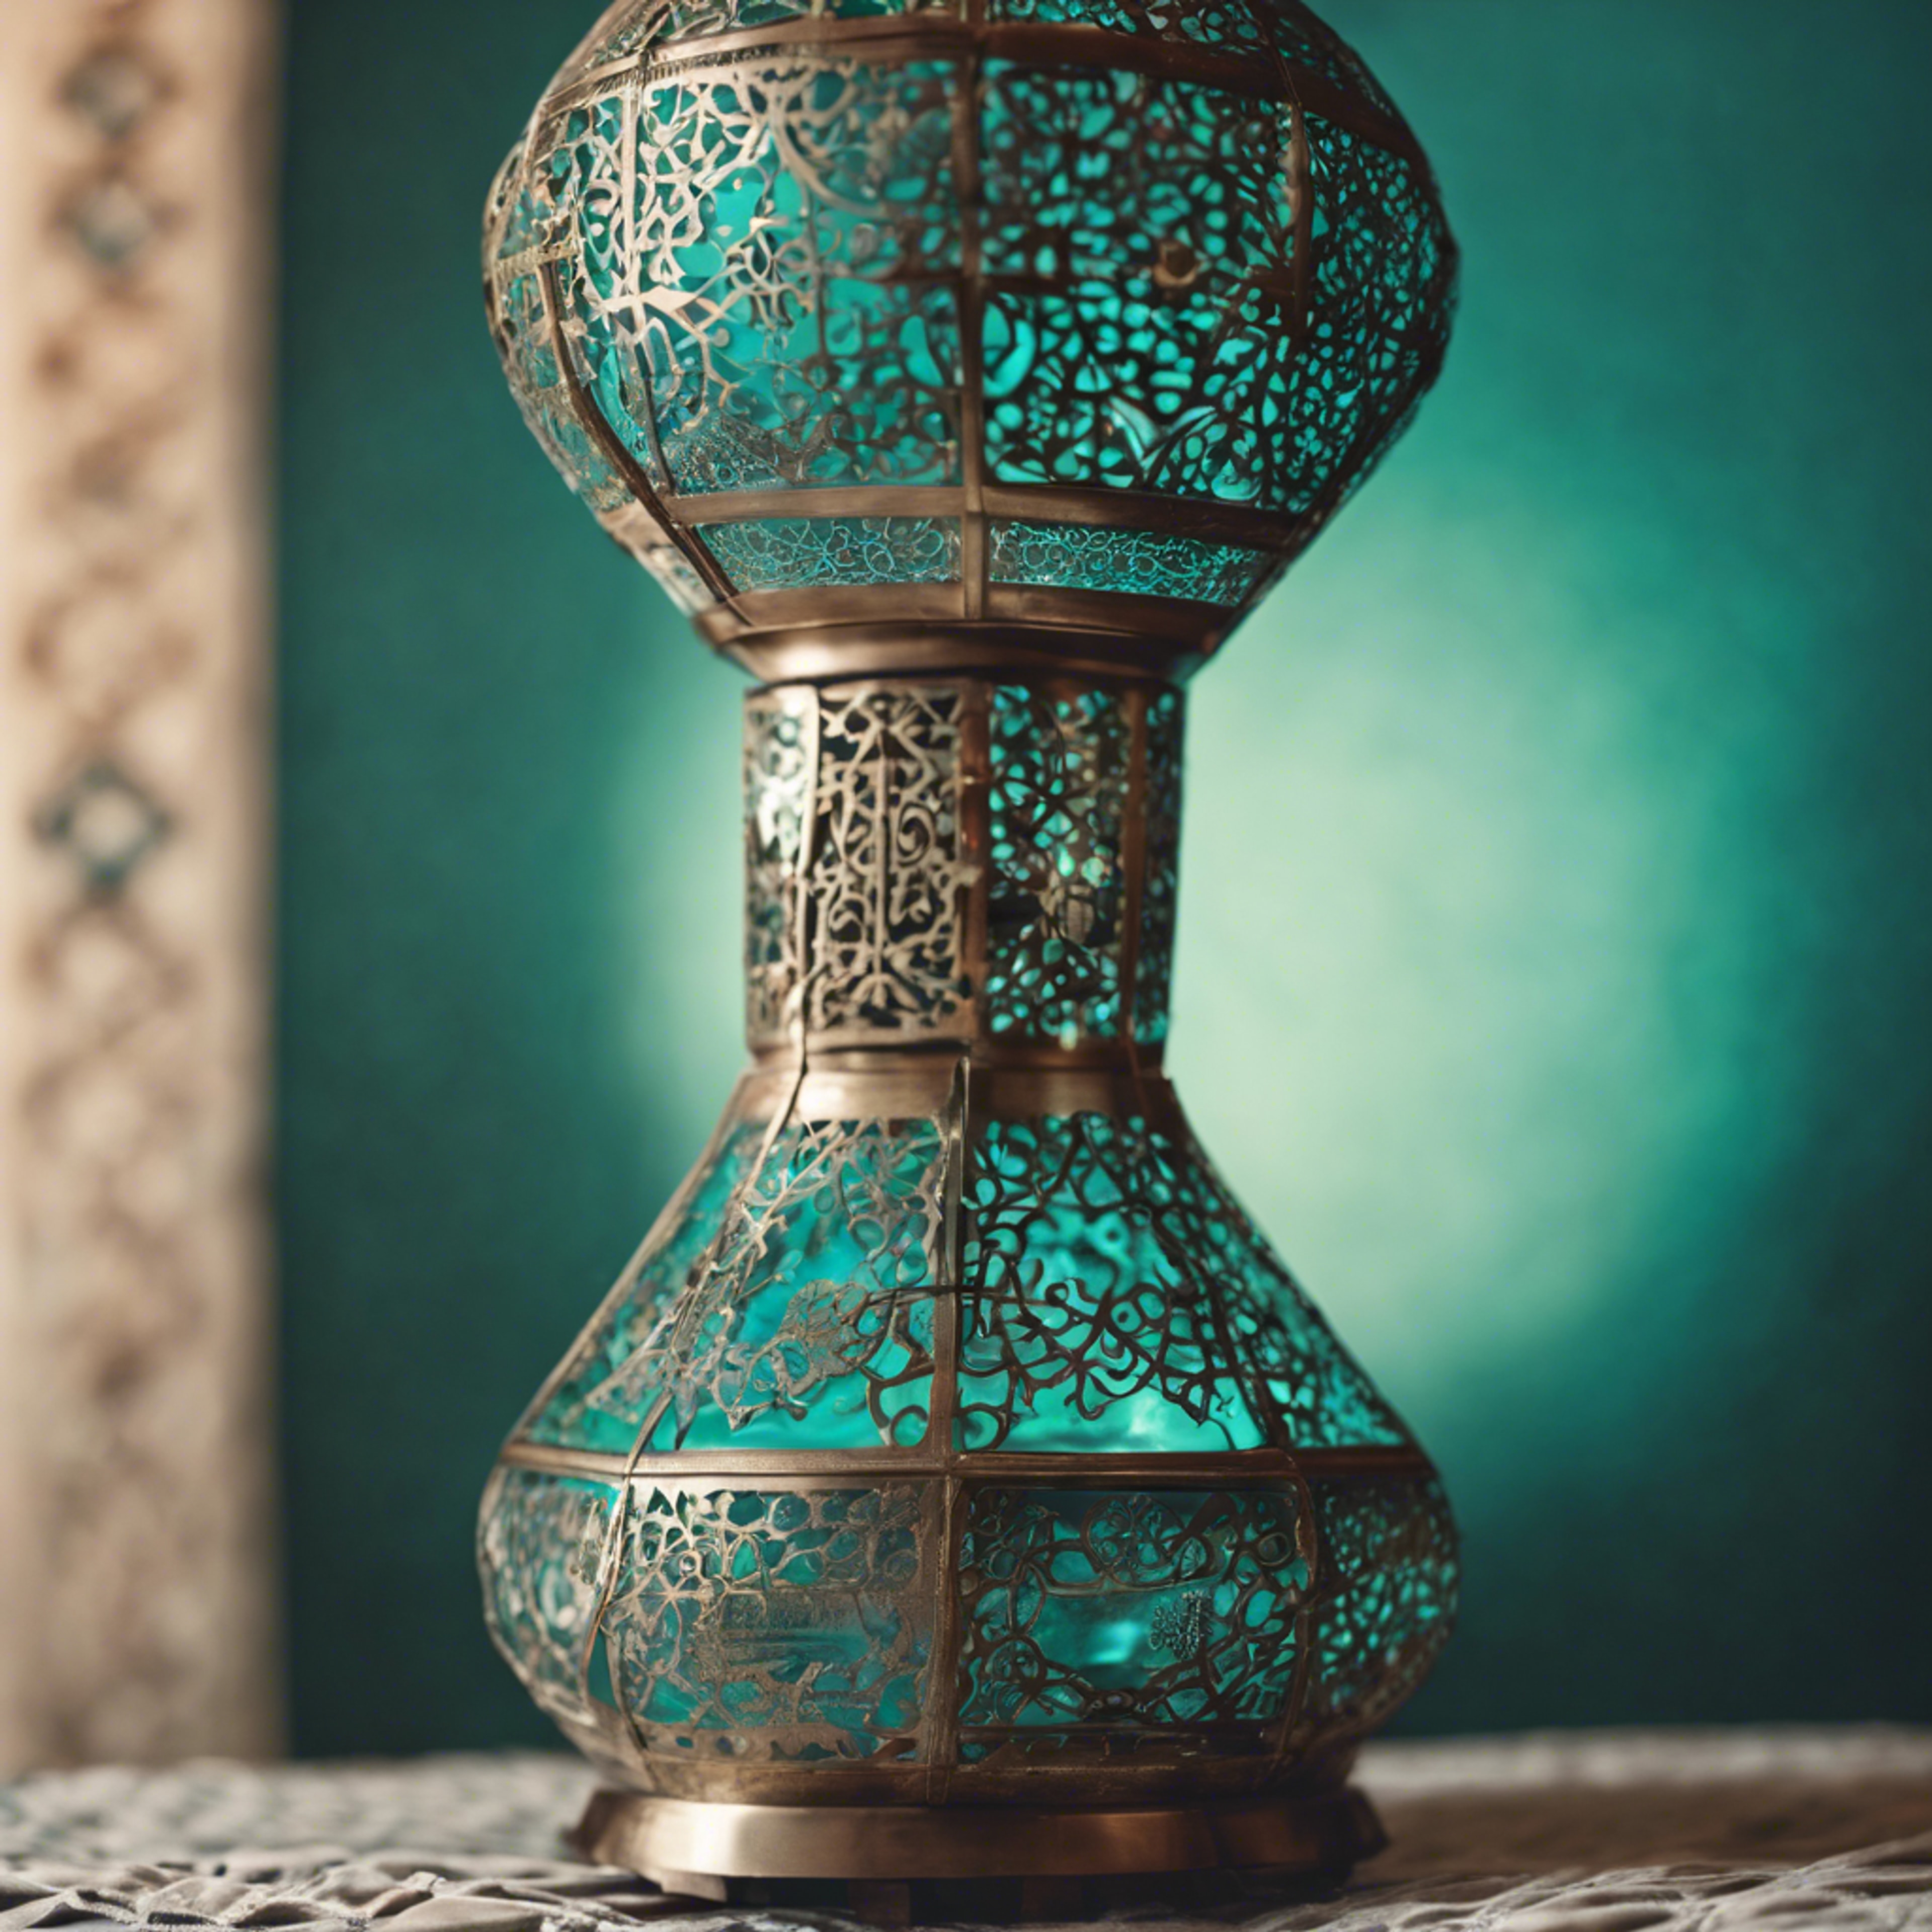 A traditional Moroccan lamp in a cool teal color. Tapetai[a27f0371dbce4744aca5]